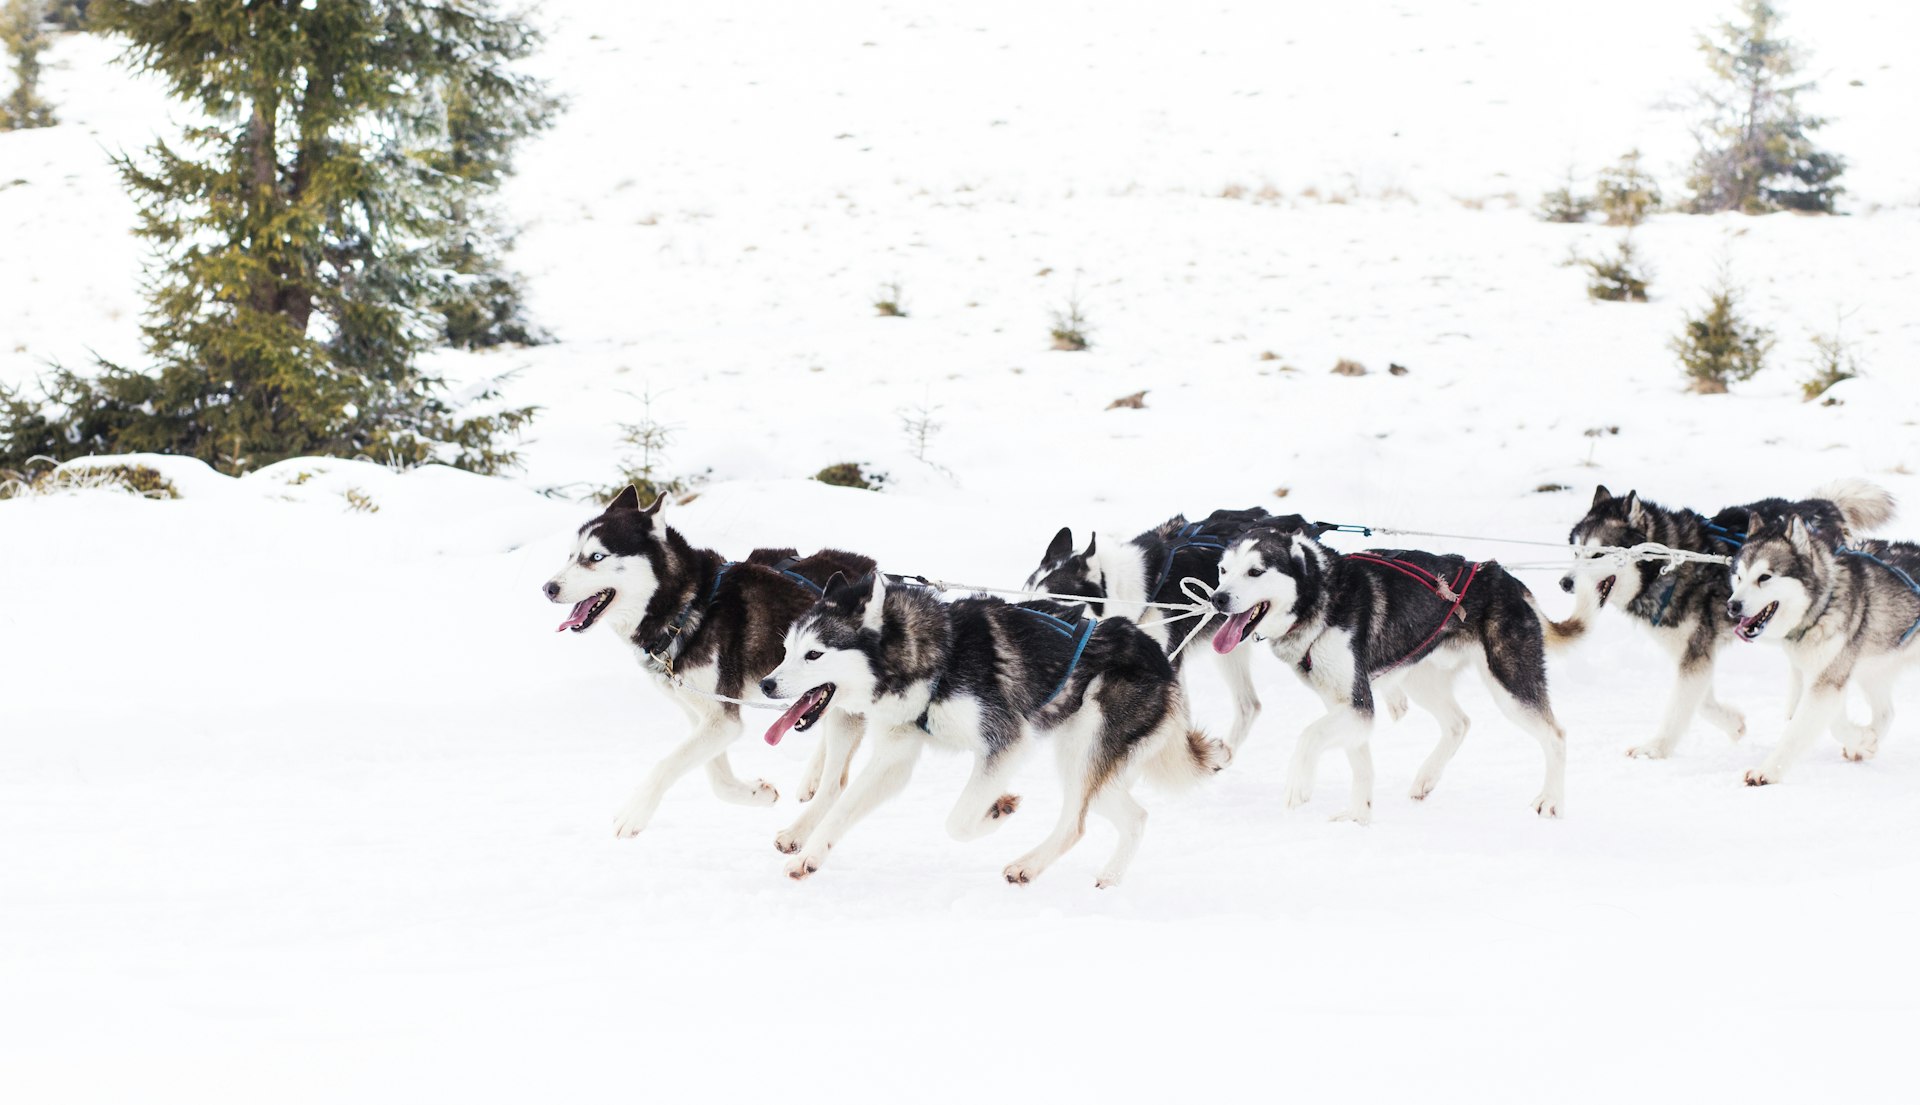 Husky dogs pull a sled through a snowy landscape